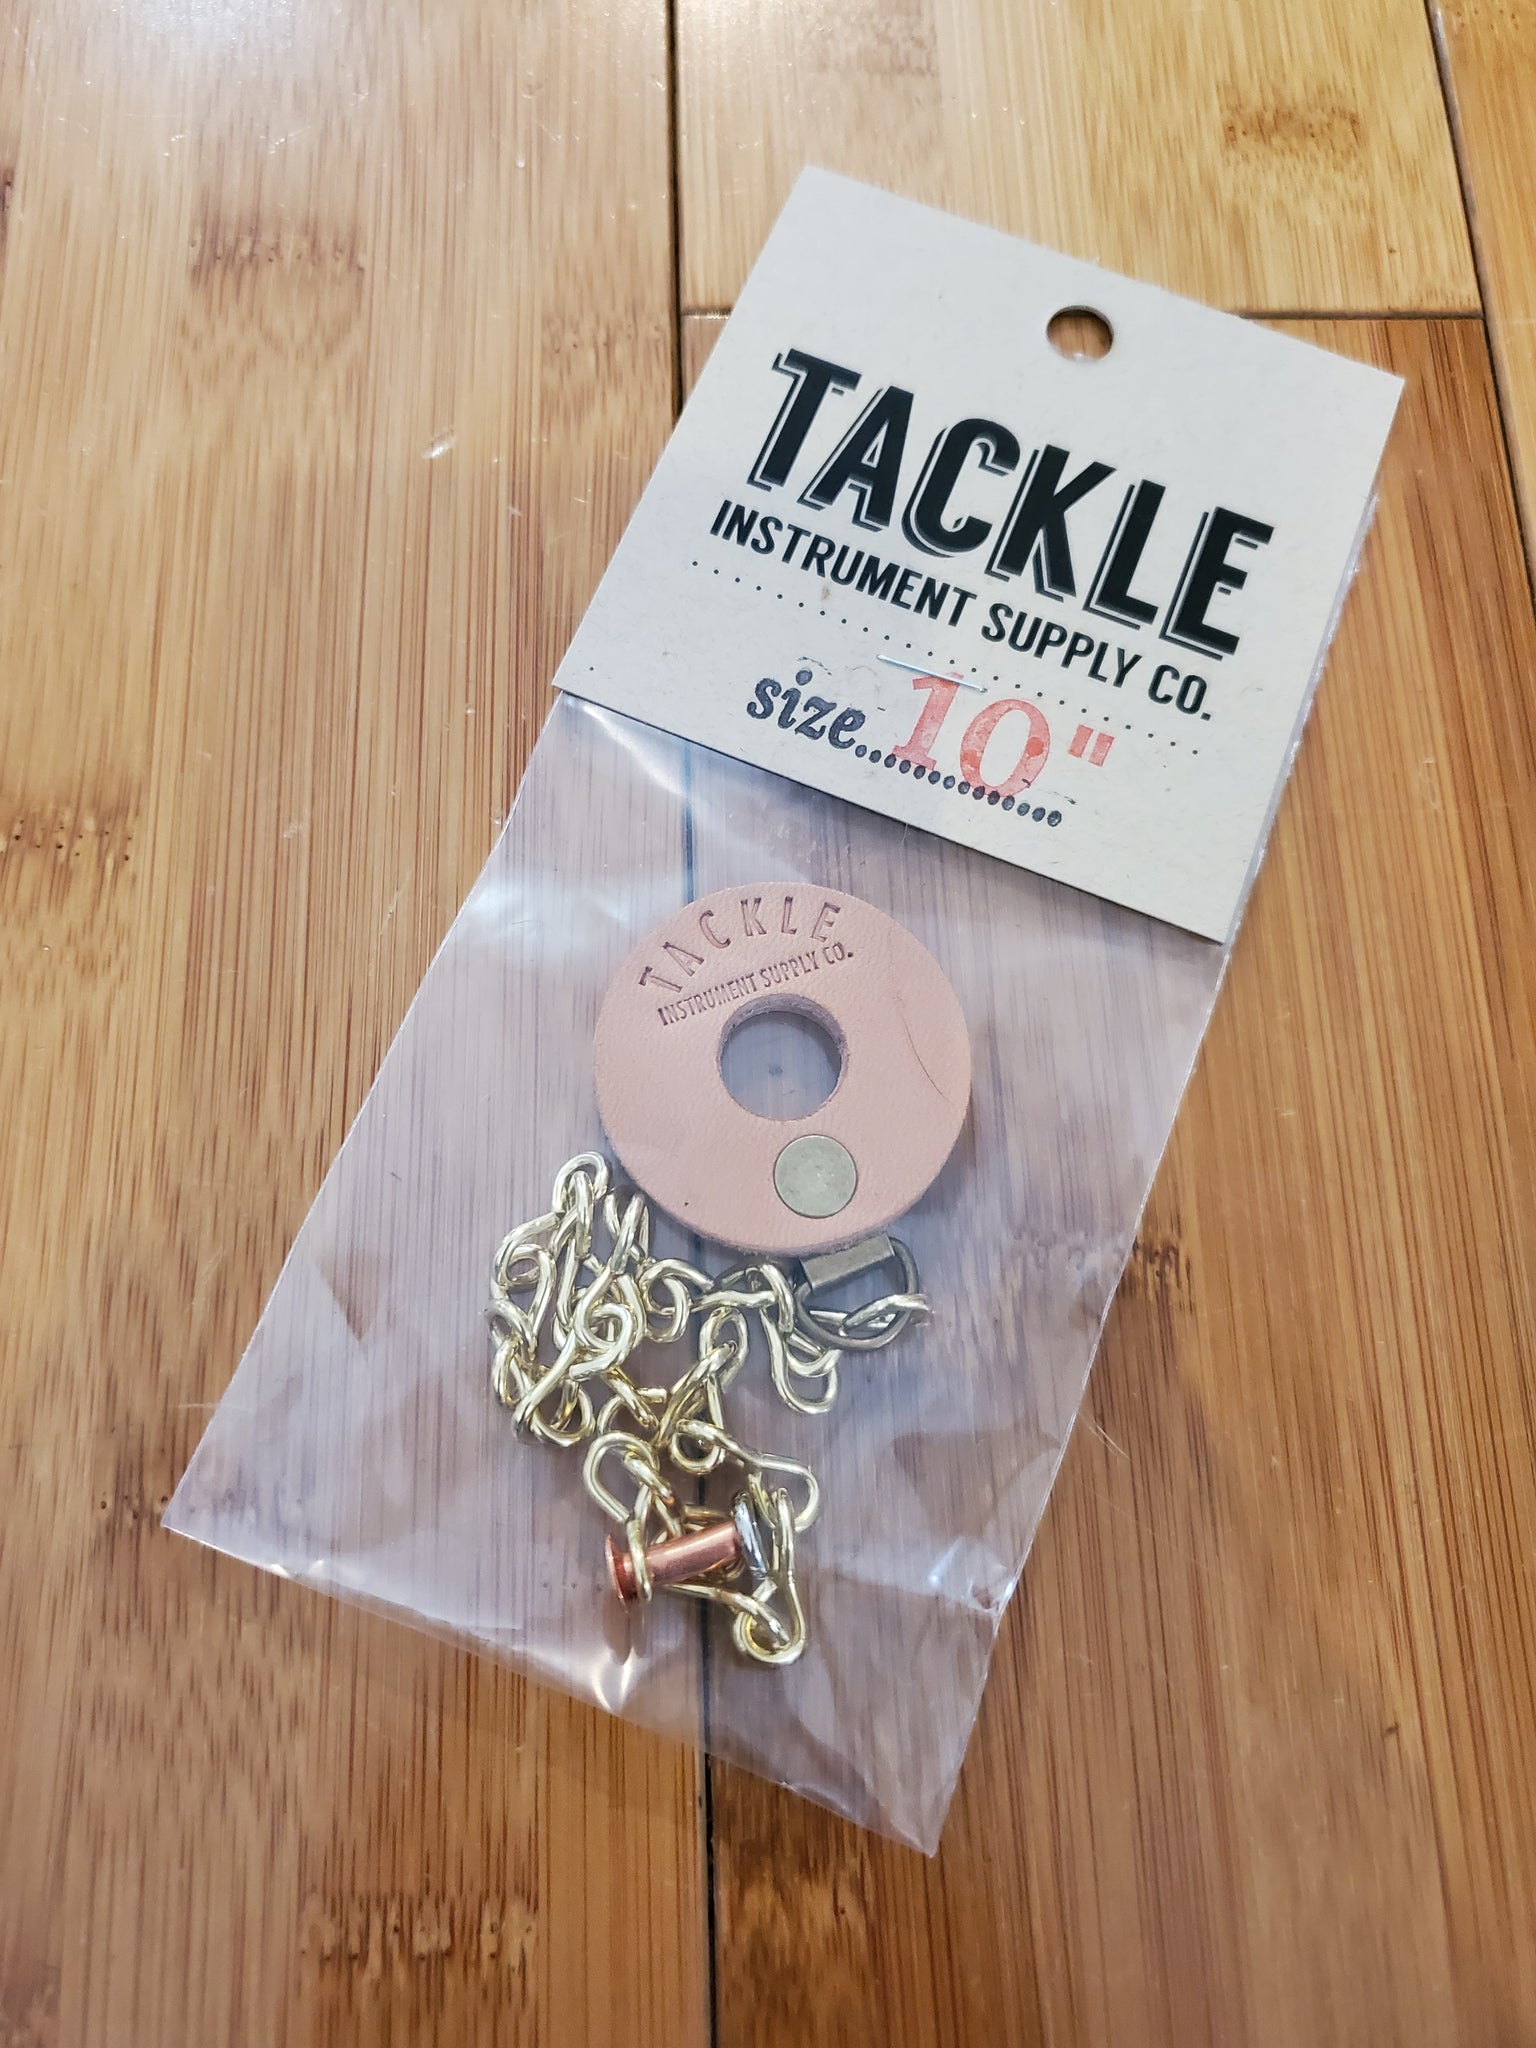 Accessories - Tackle Instruments 10" Sizzle Chain